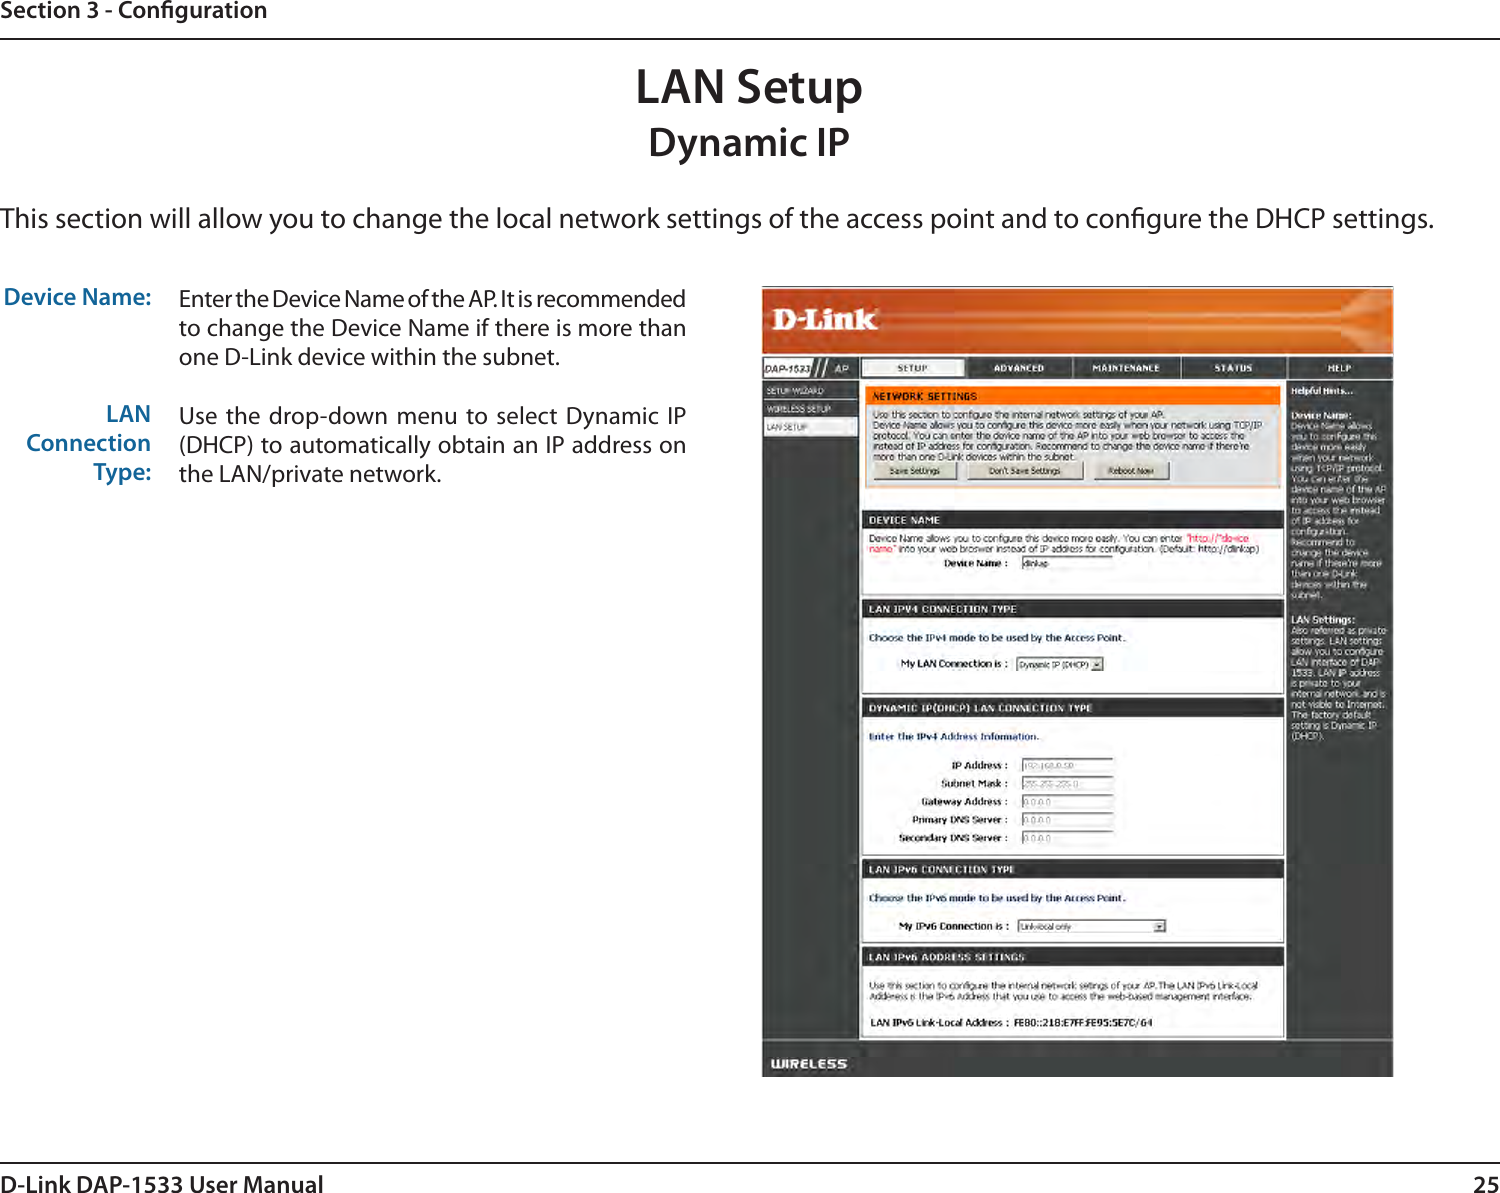 25D-Link DAP-1533 User ManualSection 3 - CongurationLAN SetupThis section will allow you to change the local network settings of the access point and to congure the DHCP settings.Device Name:LAN Connection Type:Enter the Device Name of the AP. It is recommended to change the Device Name if there is more than one D-Link device within the subnet.Use the drop-down menu to select Dynamic IP (DHCP) to automatically obtain an IP address on the LAN/private network.Dynamic IP